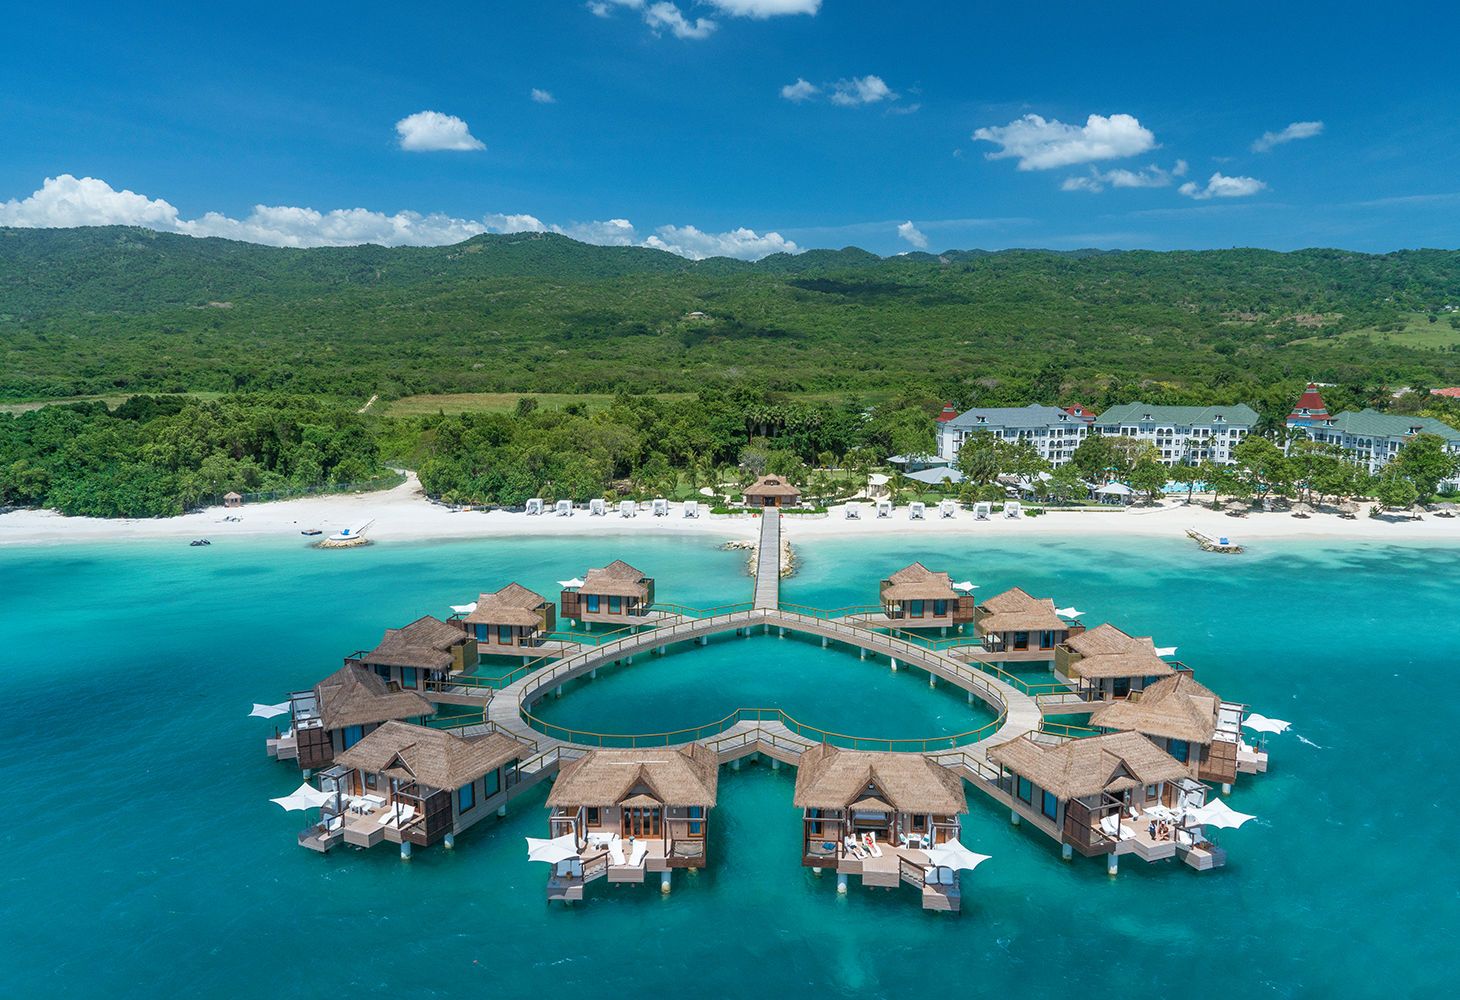 How much does Sandals Resorts cost & is it worth the money? SANDALS